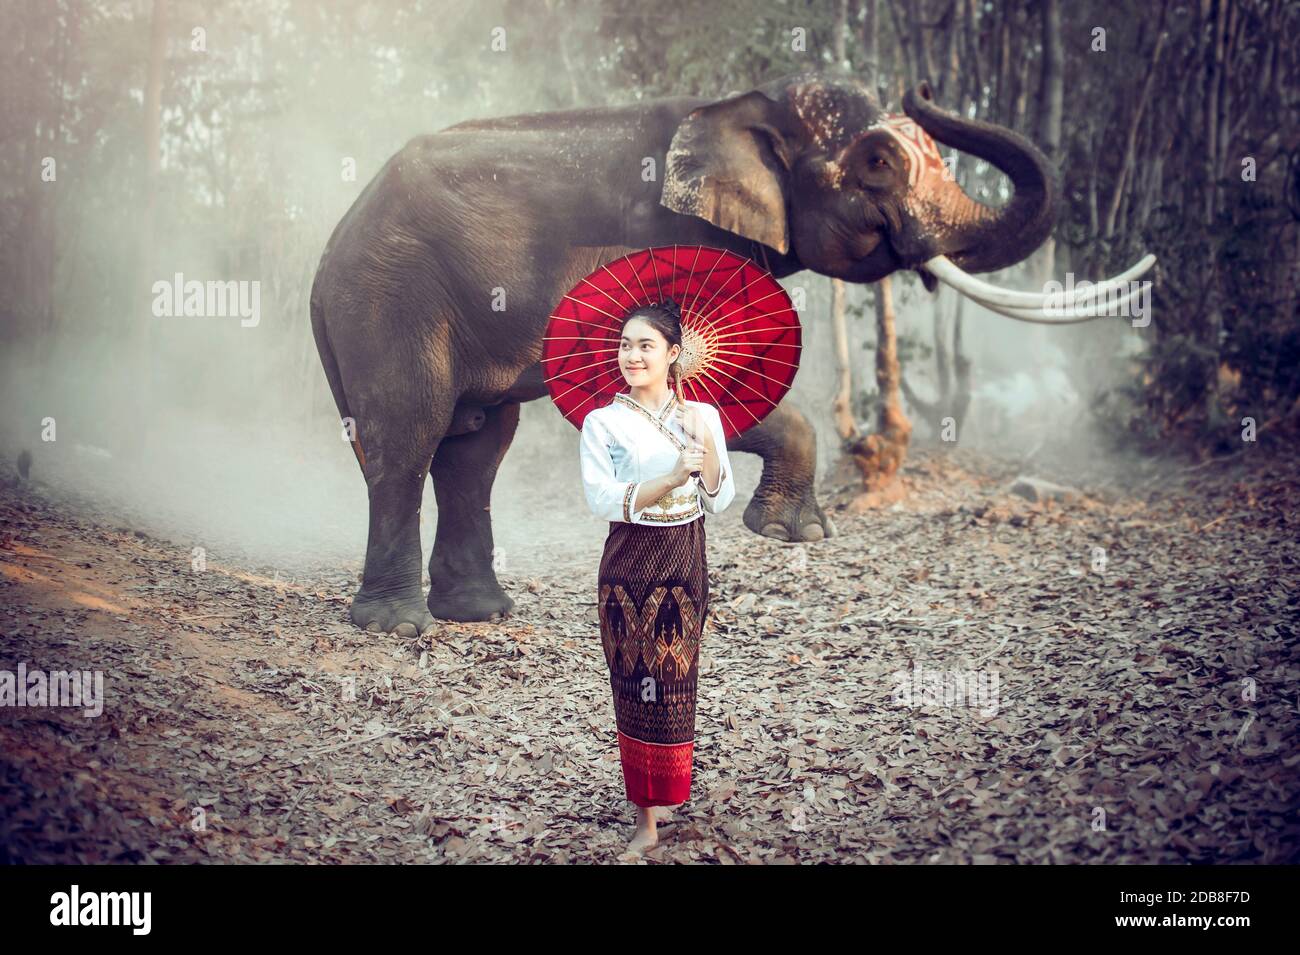 Woman with a parasol standing in front of an elephant, Thailand Stock Photo